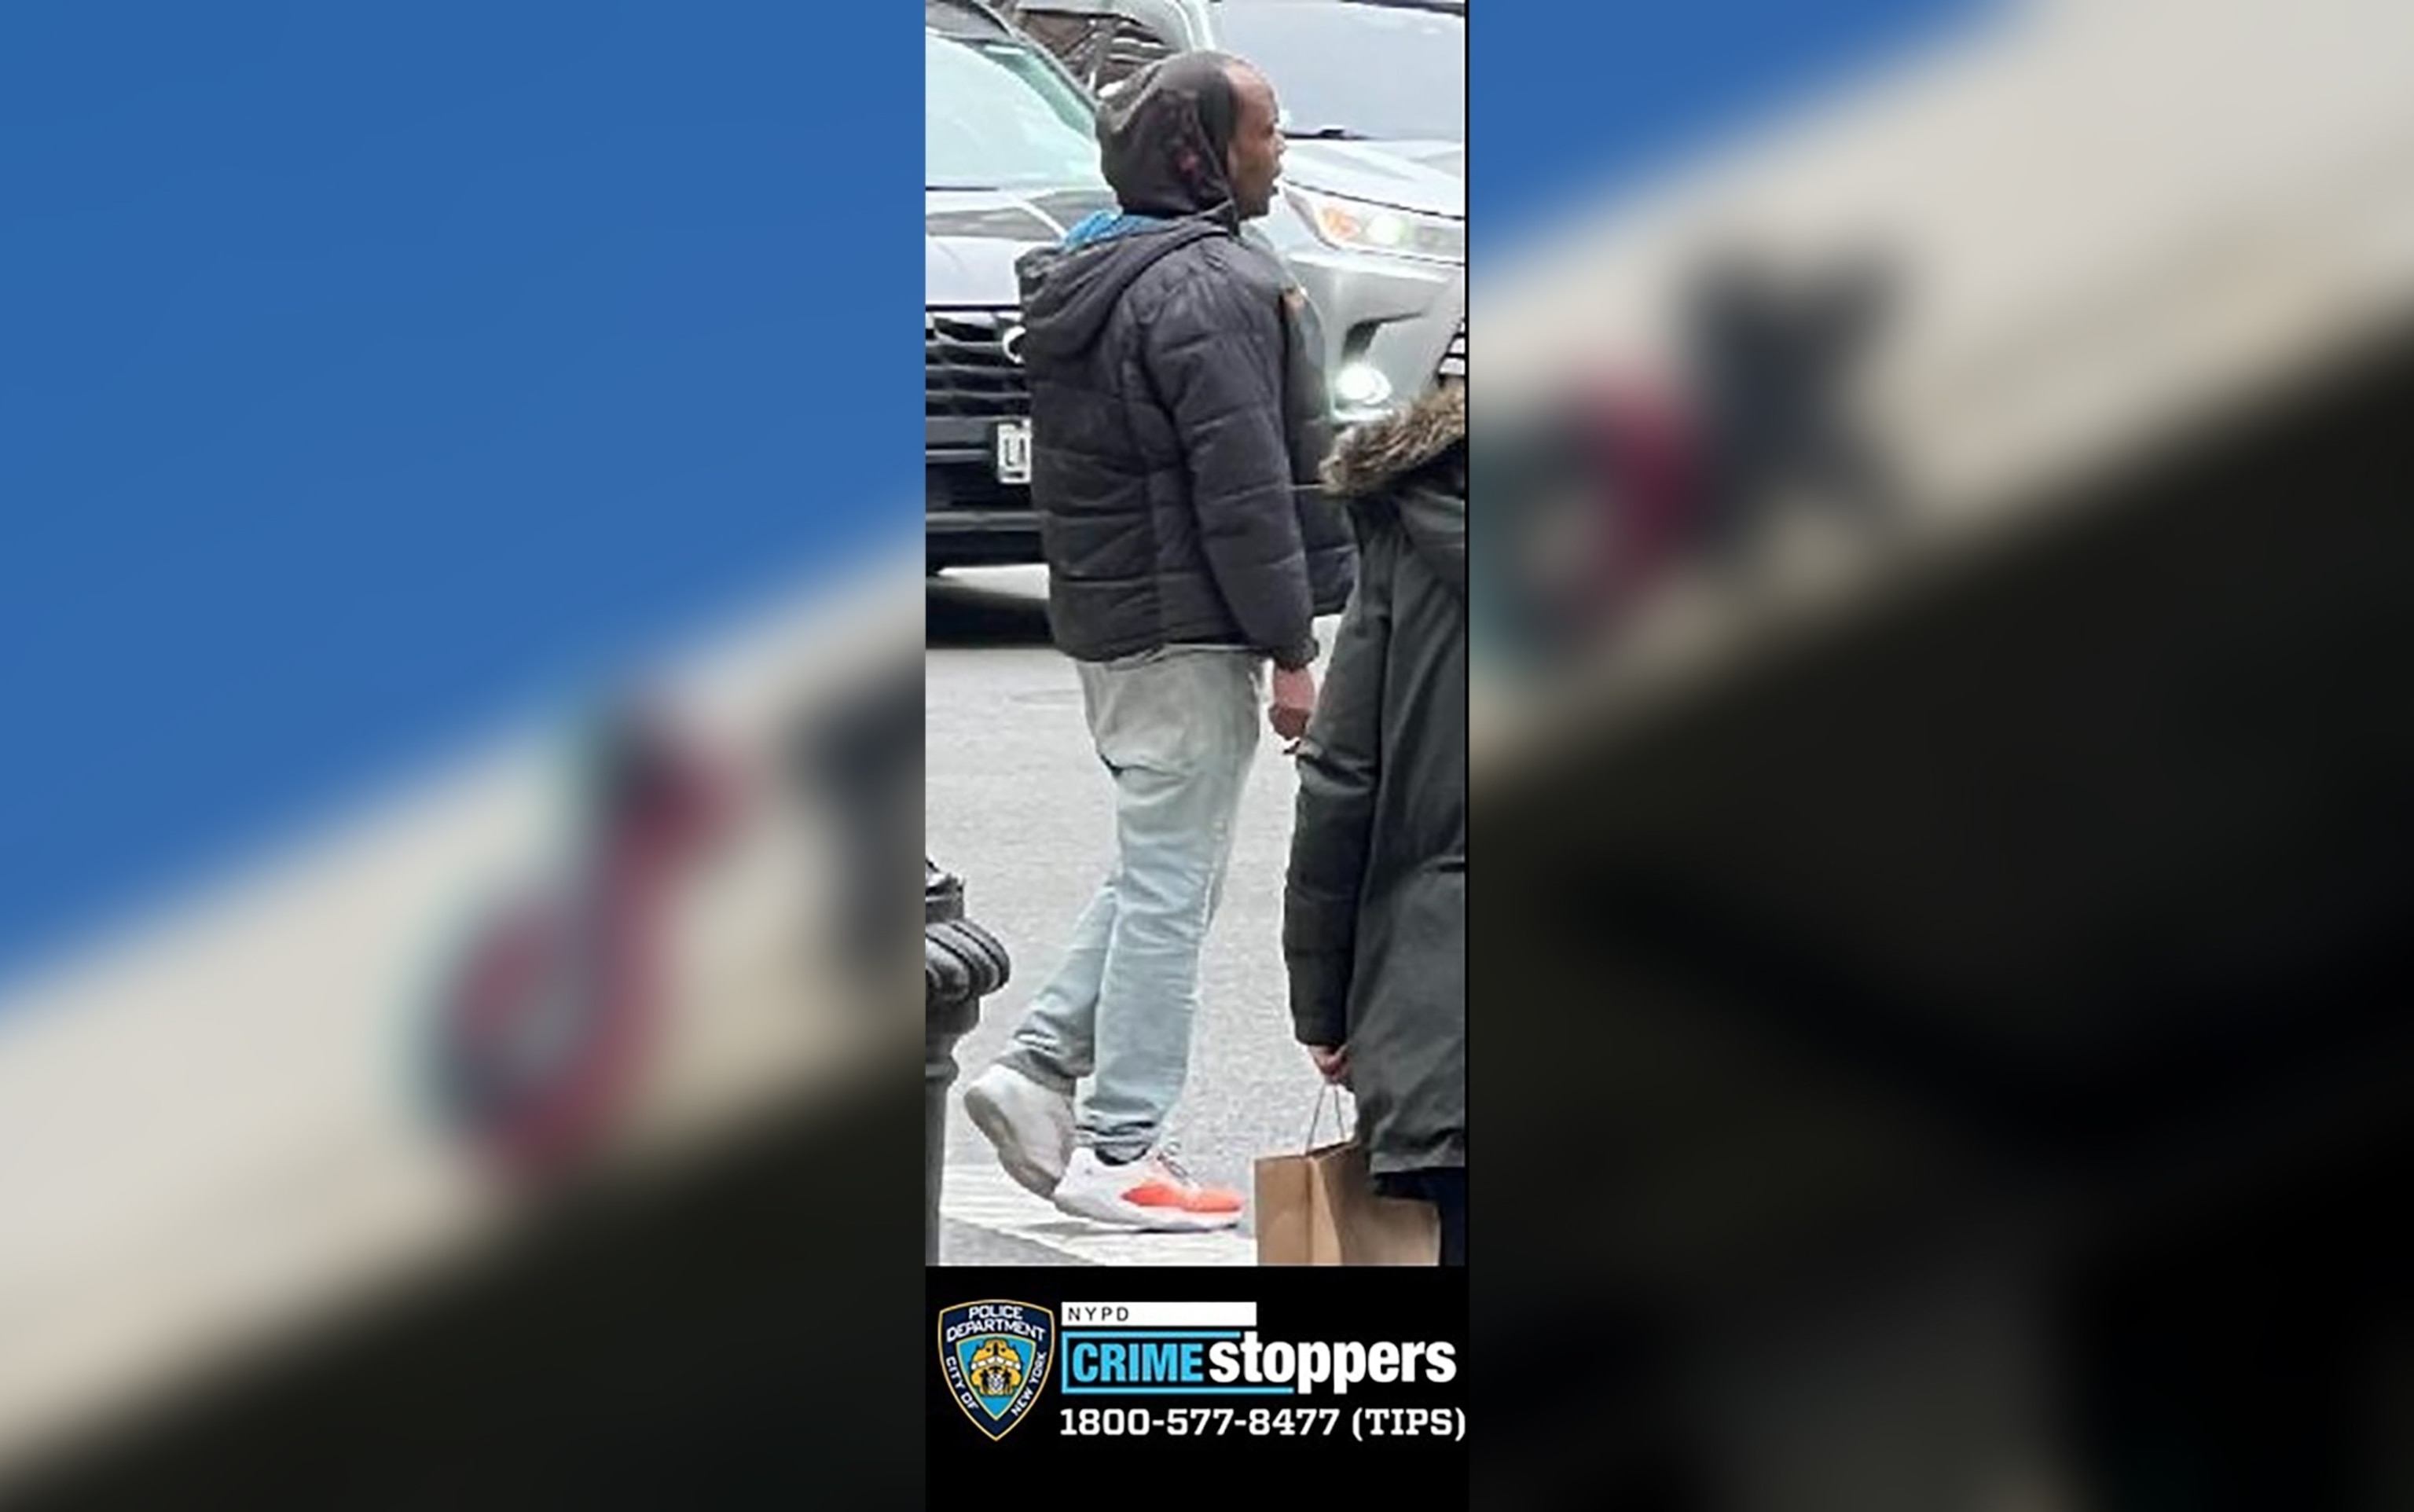 PHOTO: The NYPD is asking for the public's assistance in identifying the individual in connection with an assault that occurred within the confines of the 13 Precinct.